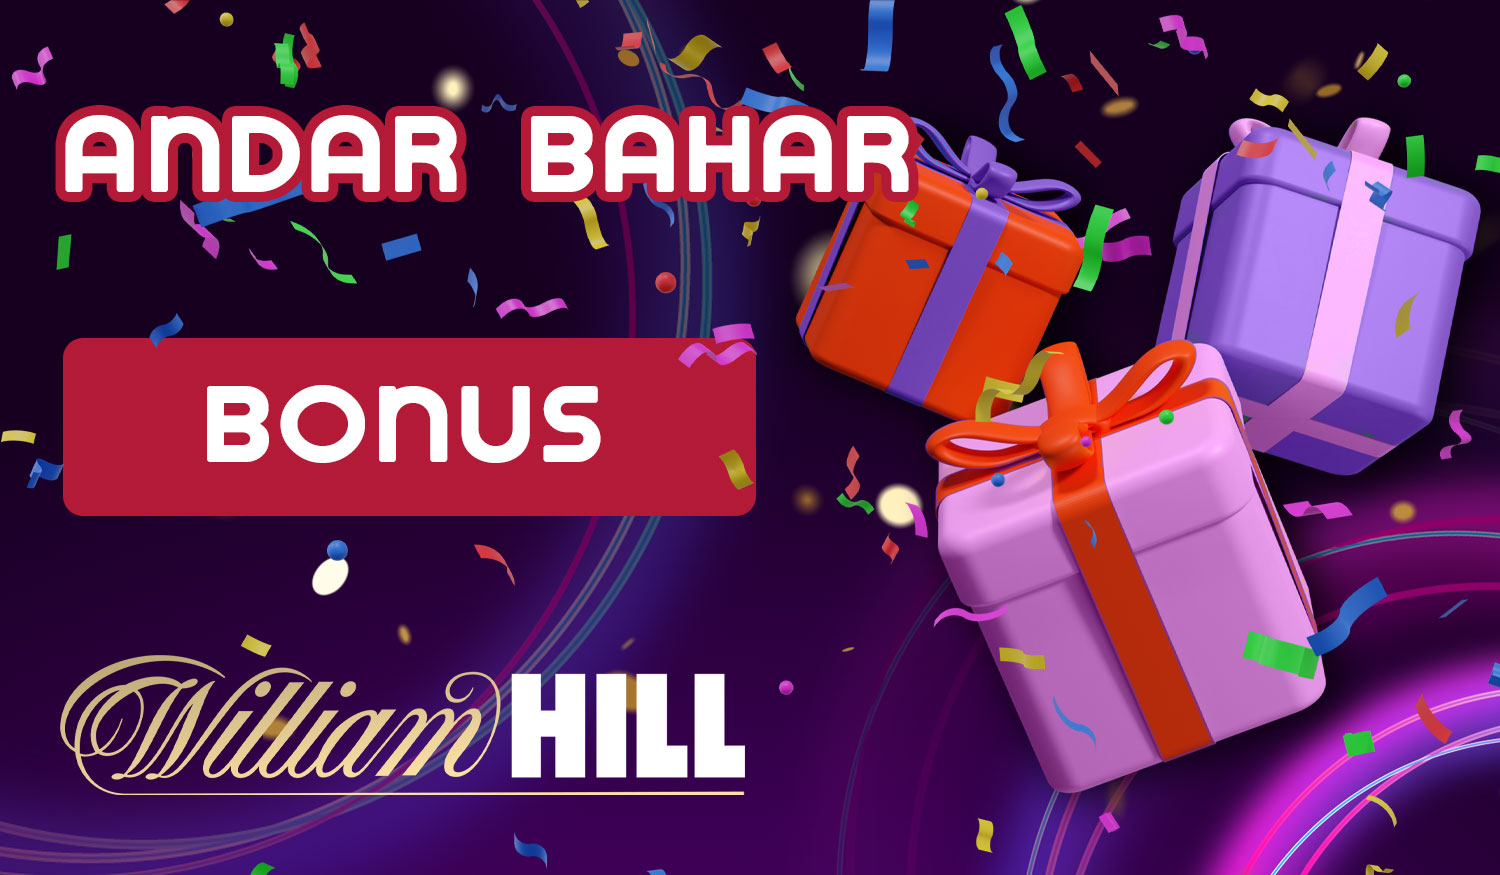 William Hill also provides bonuses for players from India